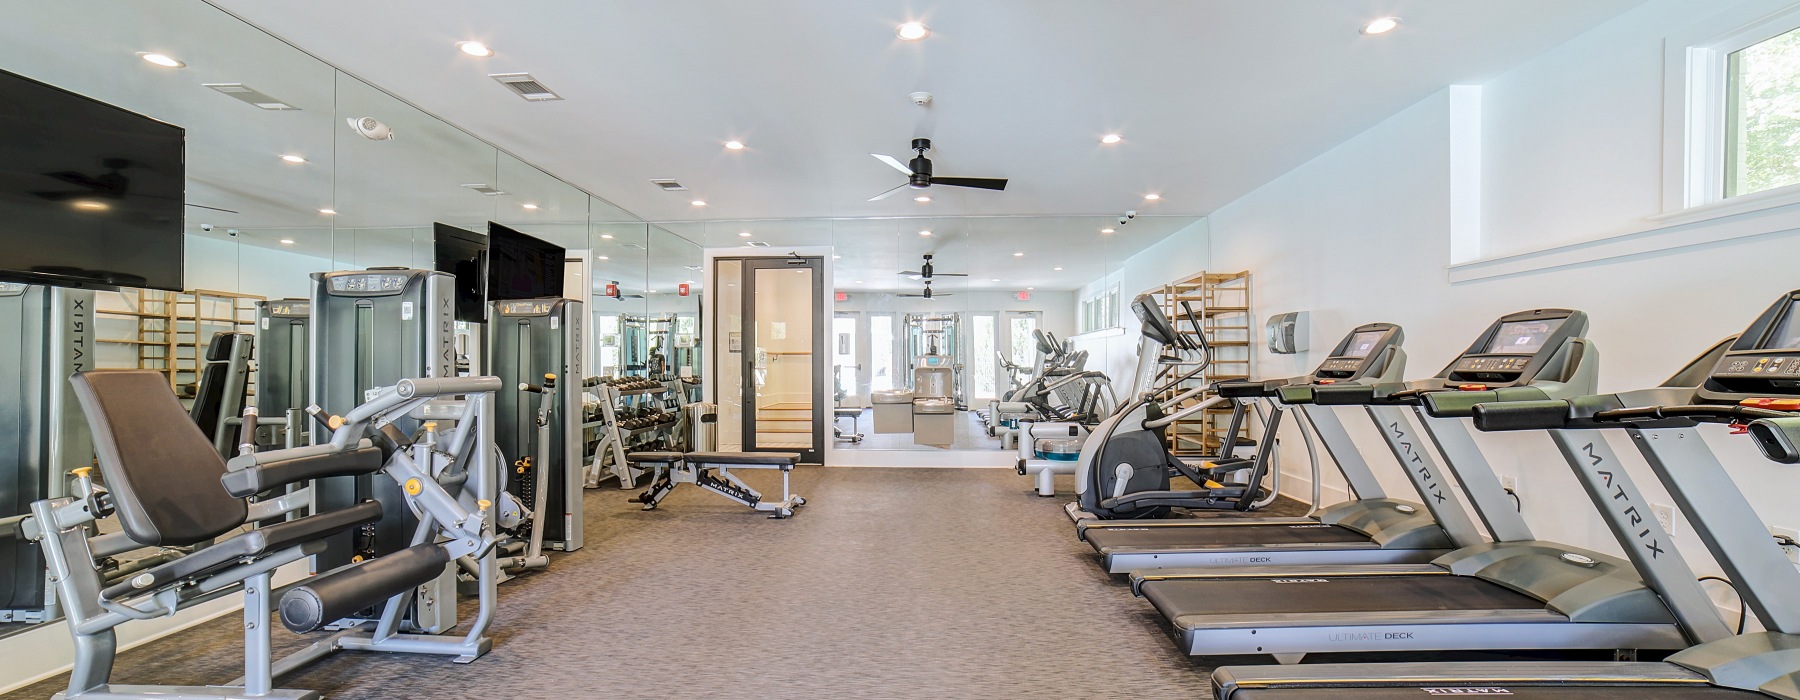 fitness room with workout equipment